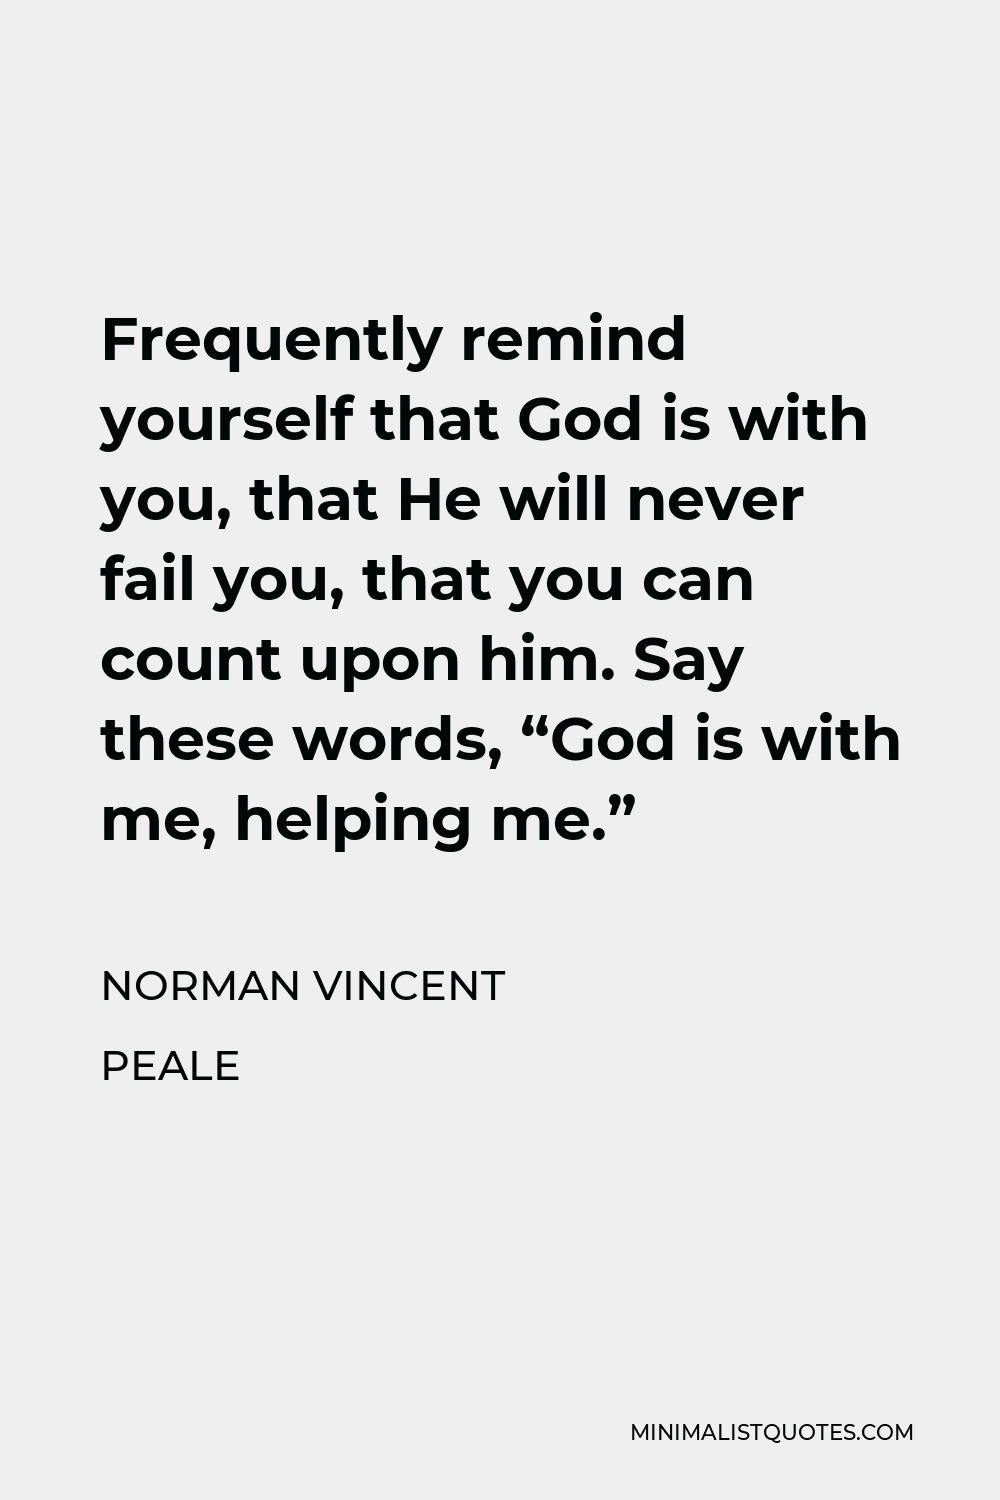 Norman Vincent Peale Quote - Frequently remind yourself that God is with you, that He will never fail you, that you can count upon him. Say these words, “God is with me, helping me.”